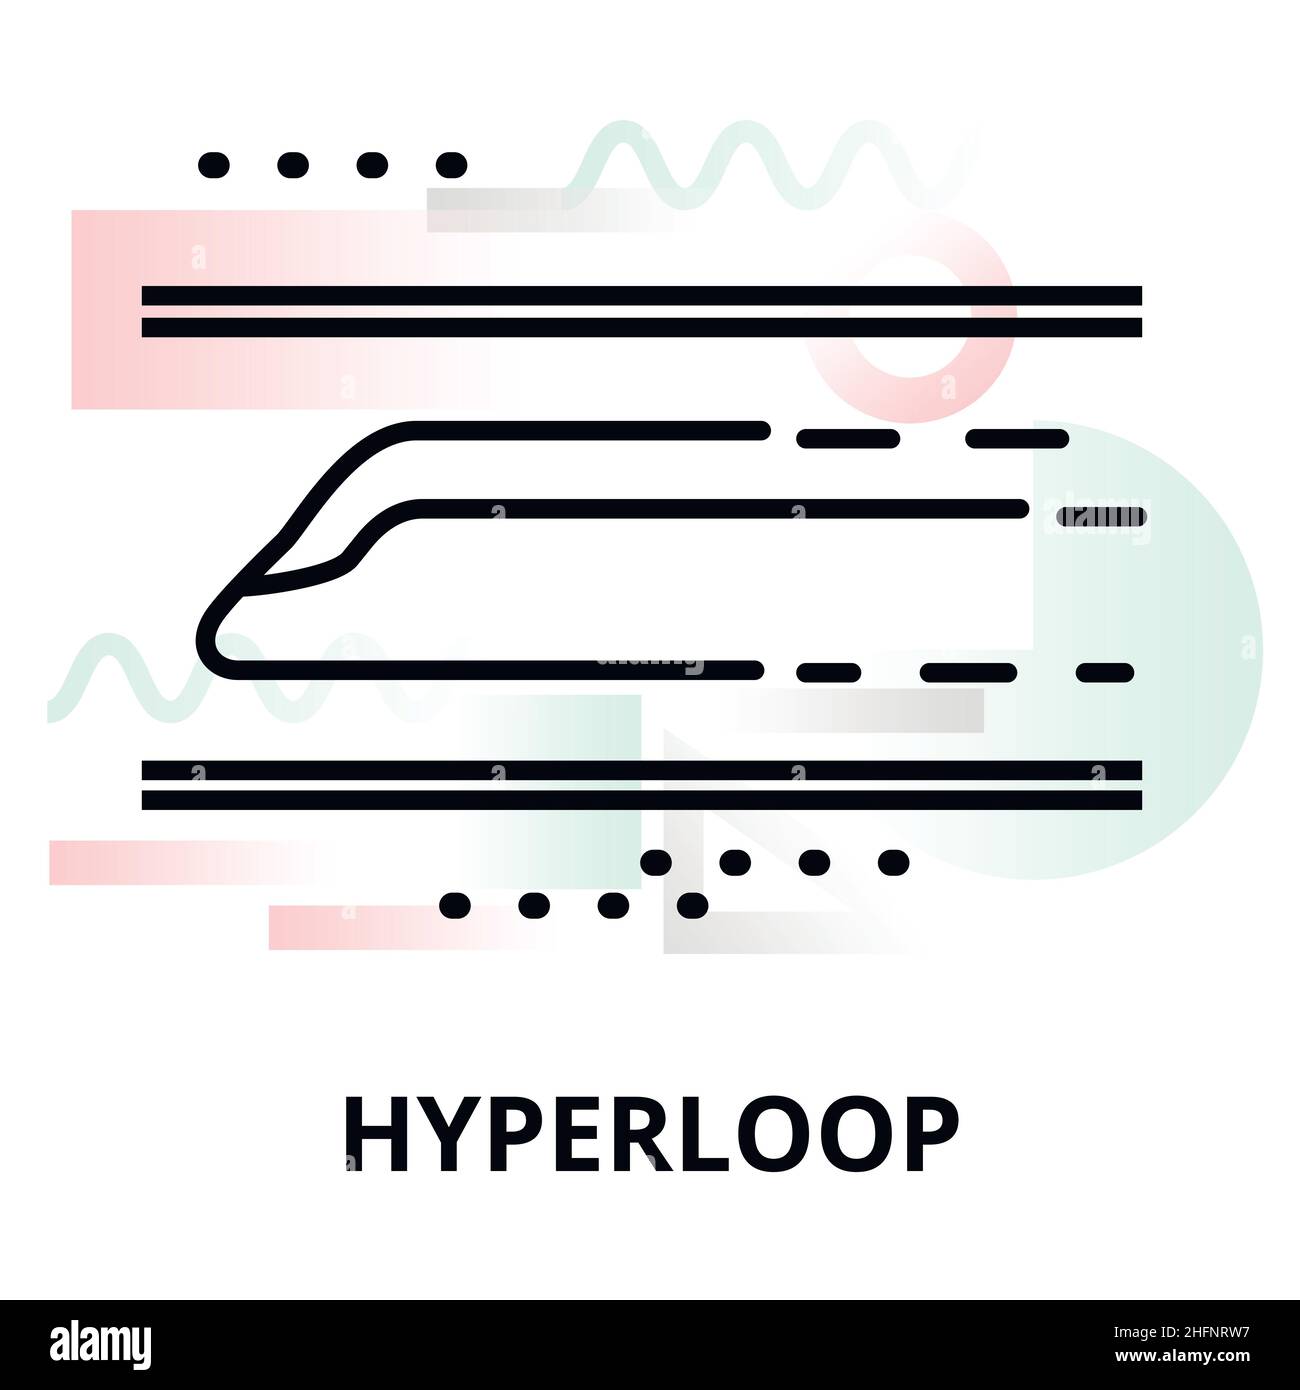 Abstract icon of future technology - hyperloop on color geometric shapes background, for graphic and web design Stock Vector